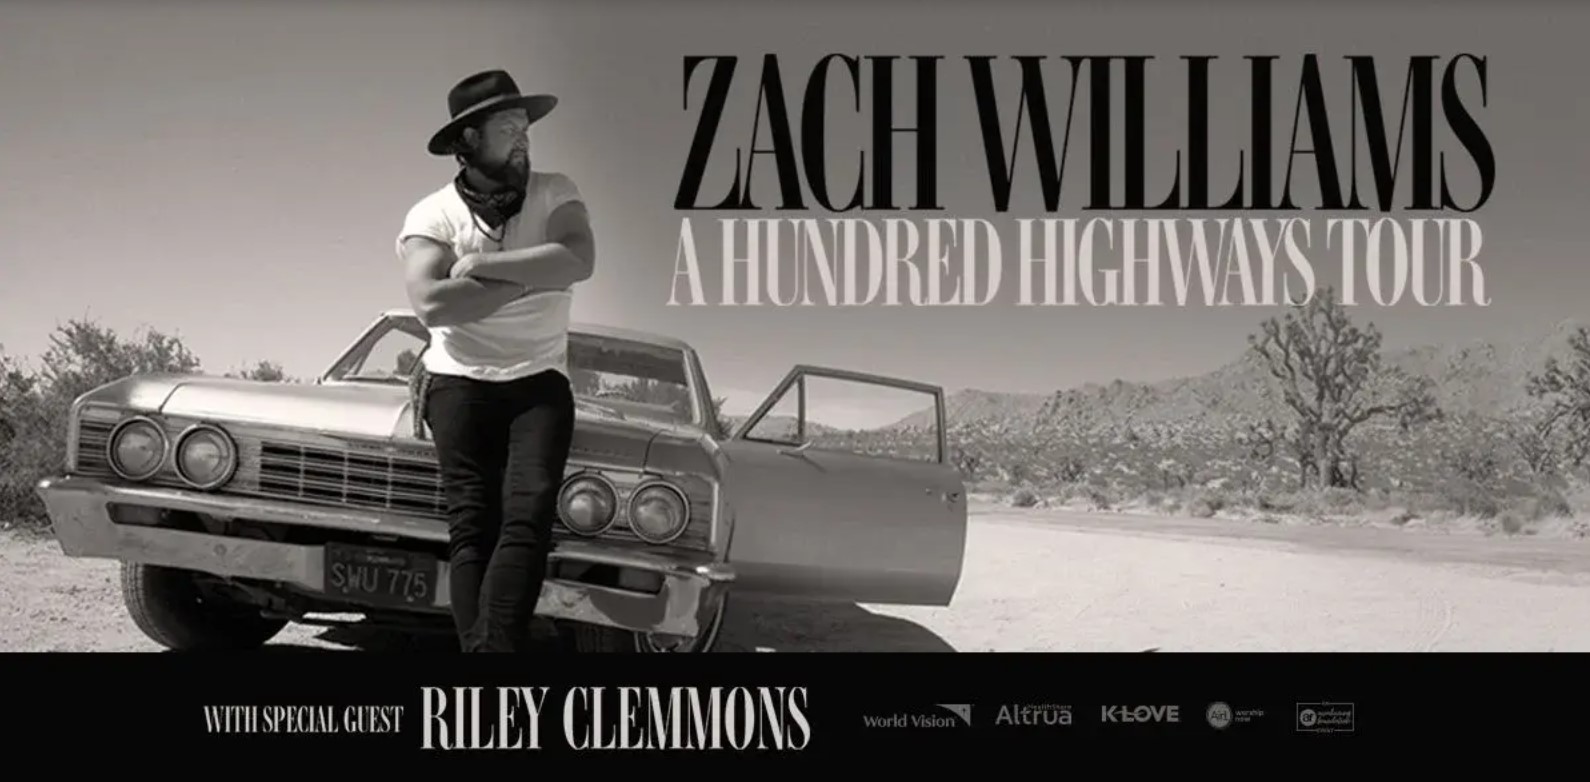 Zach Williams, Christian blues and southern rock artist, marketing collateral